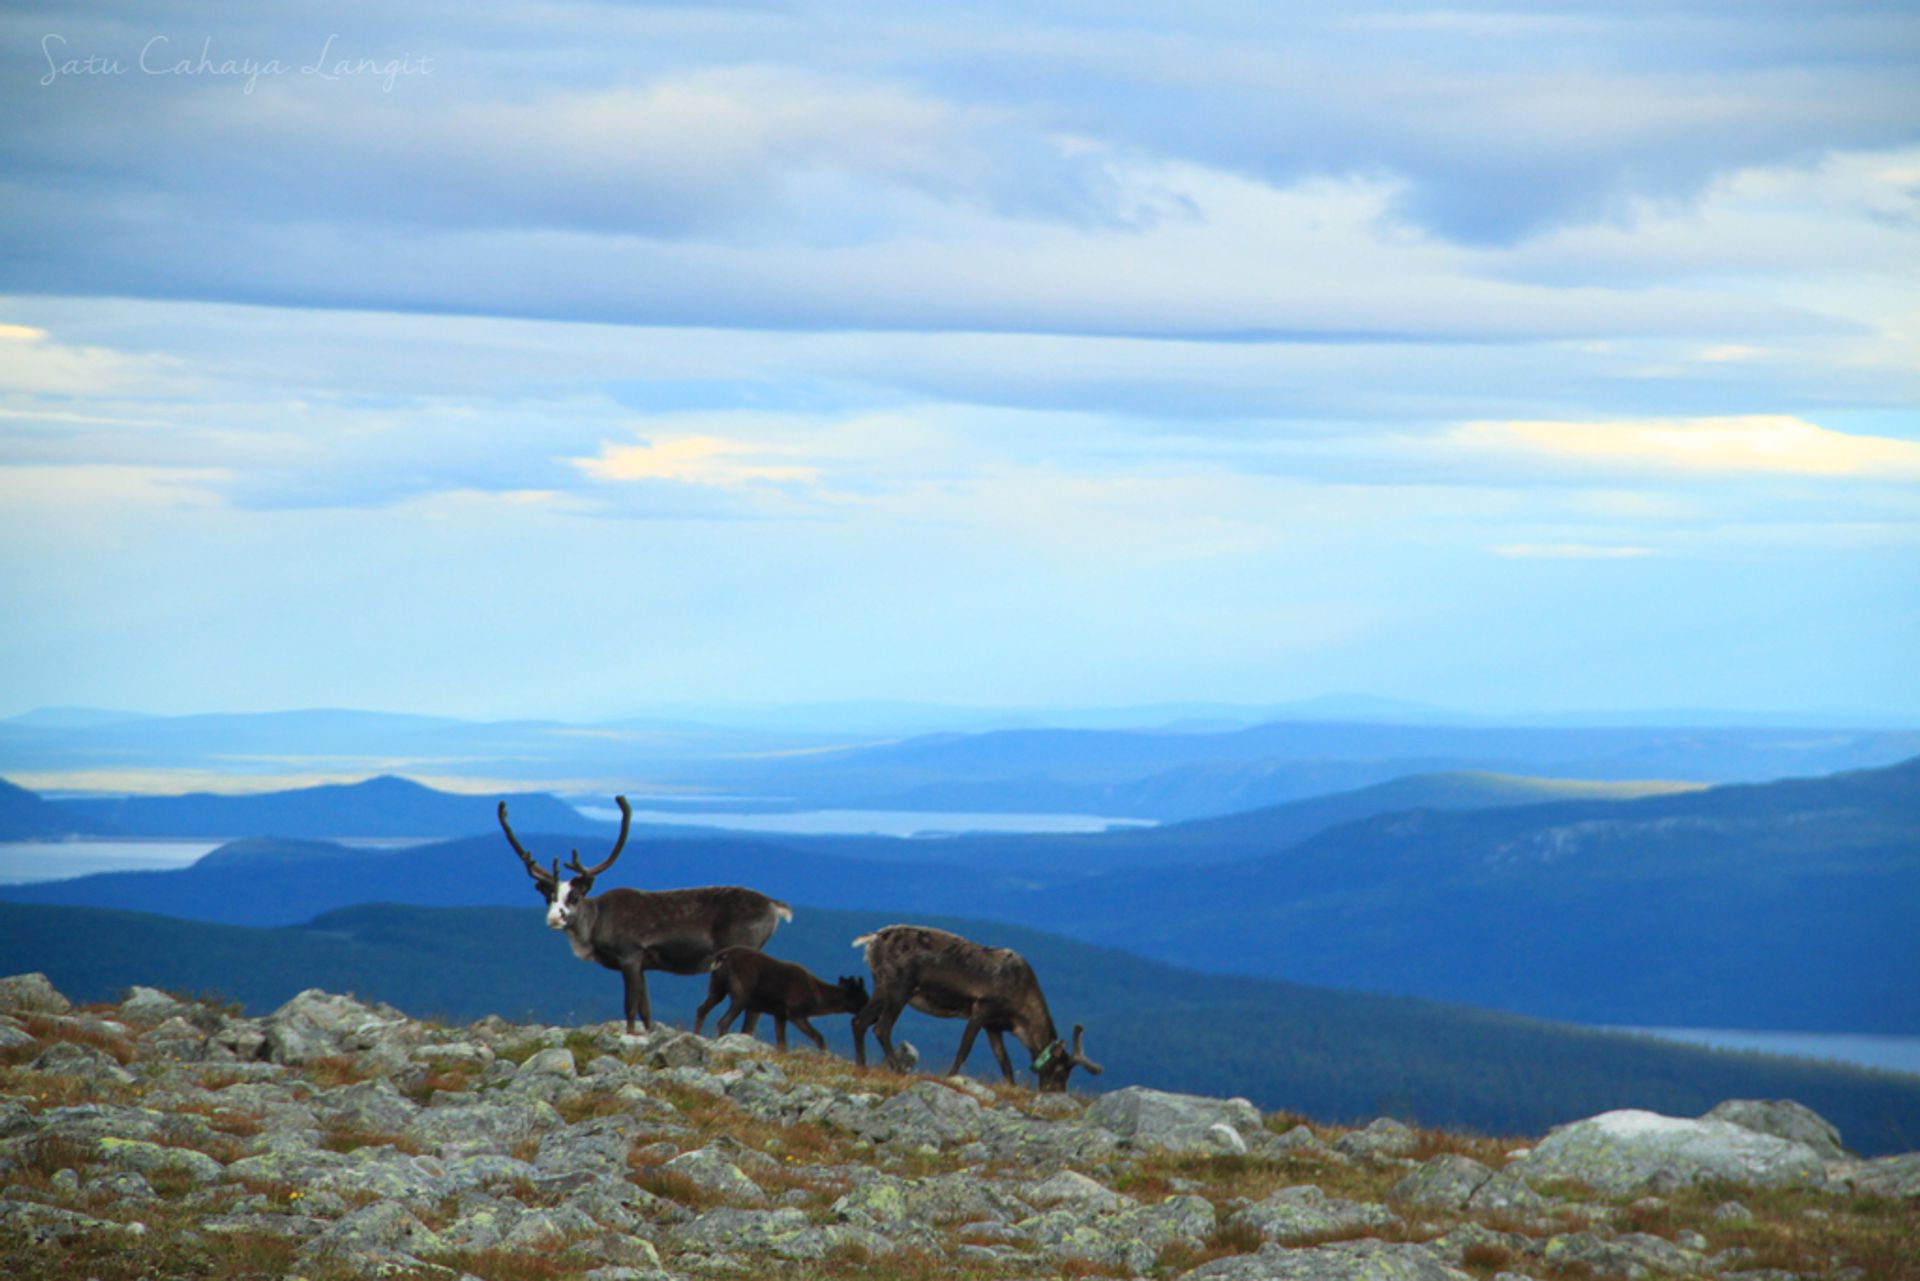 Reindeer on the side of a mountain.